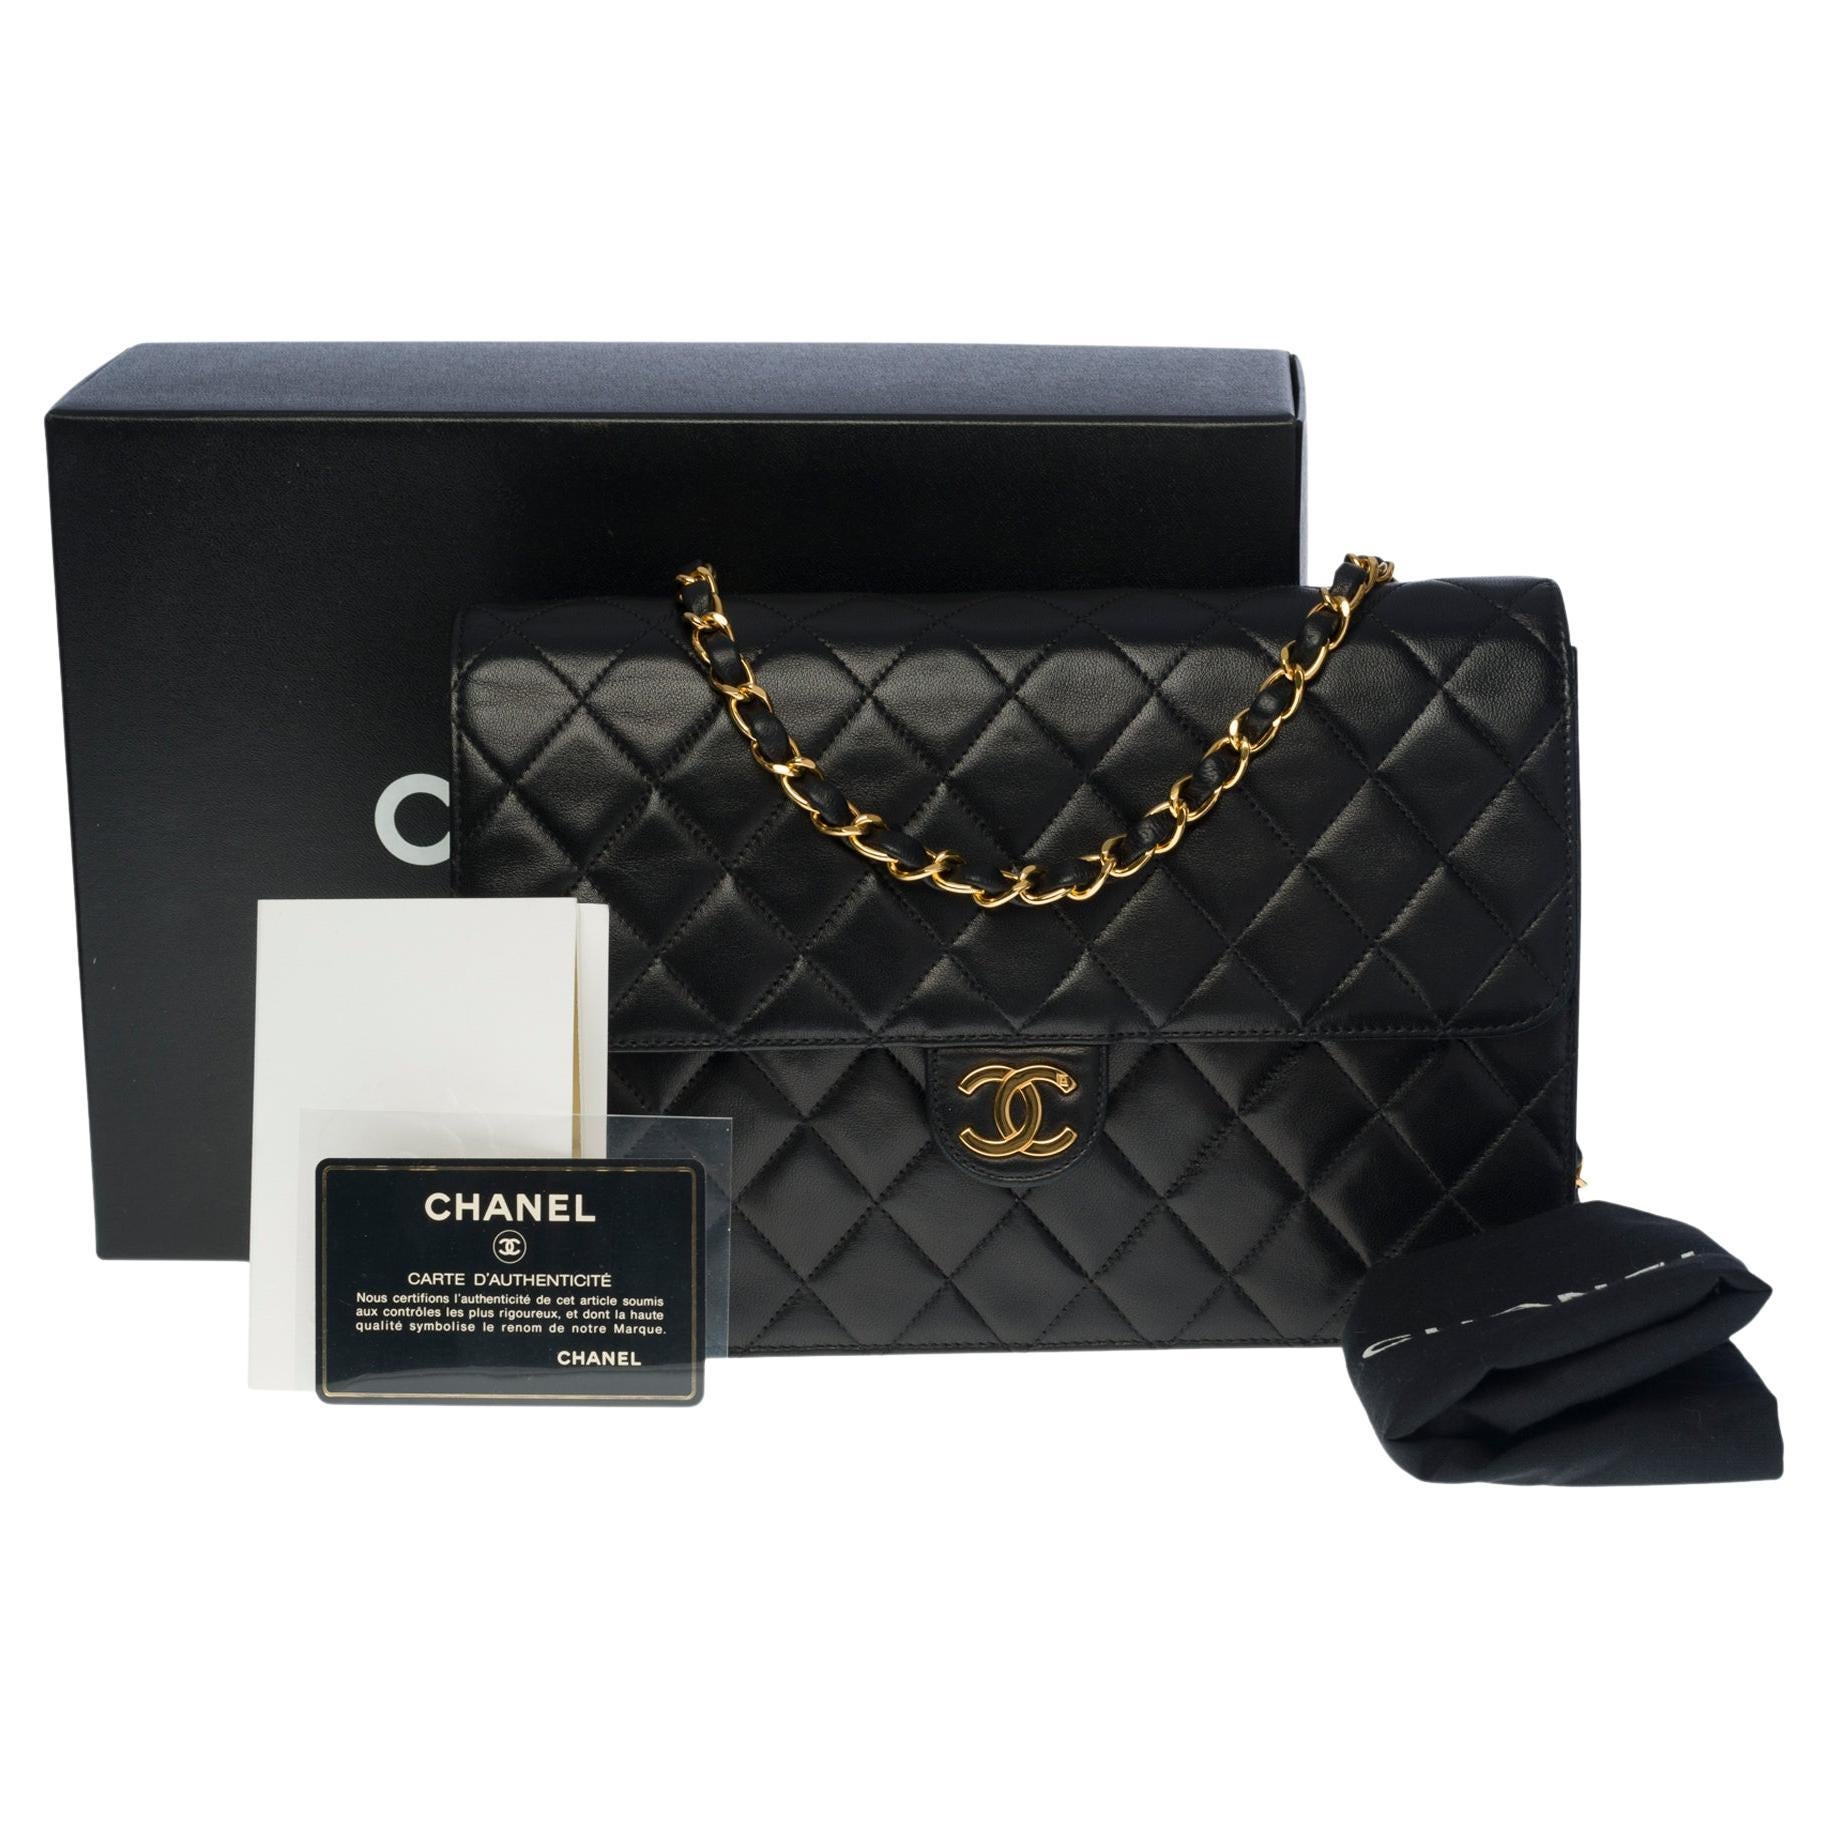 Amazing Chanel Classic shoulder flap bag in black quilted lambskin, GHW